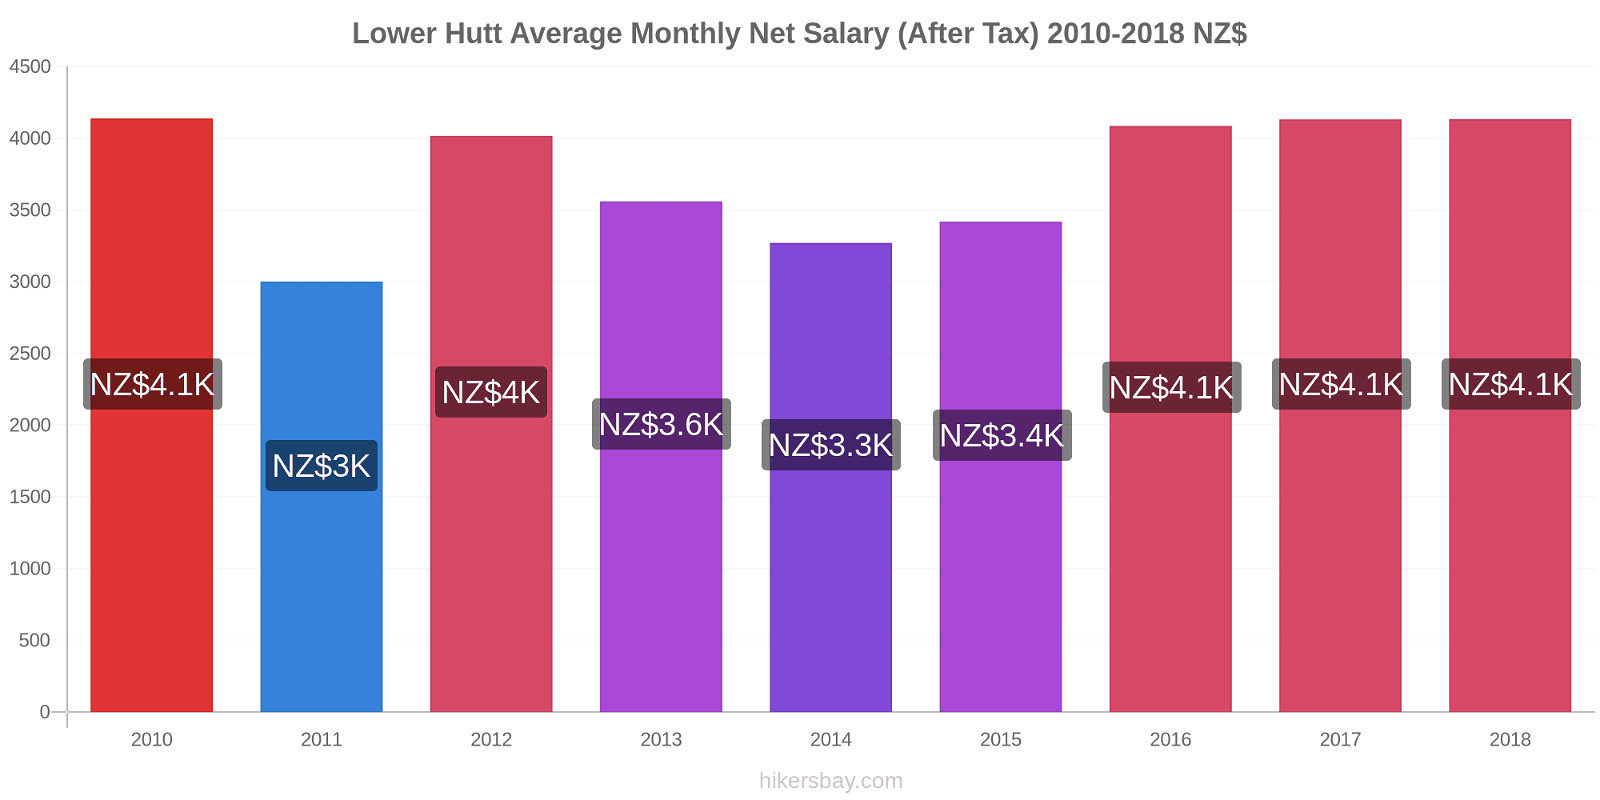 Lower Hutt price changes Average Monthly Net Salary (After Tax) hikersbay.com